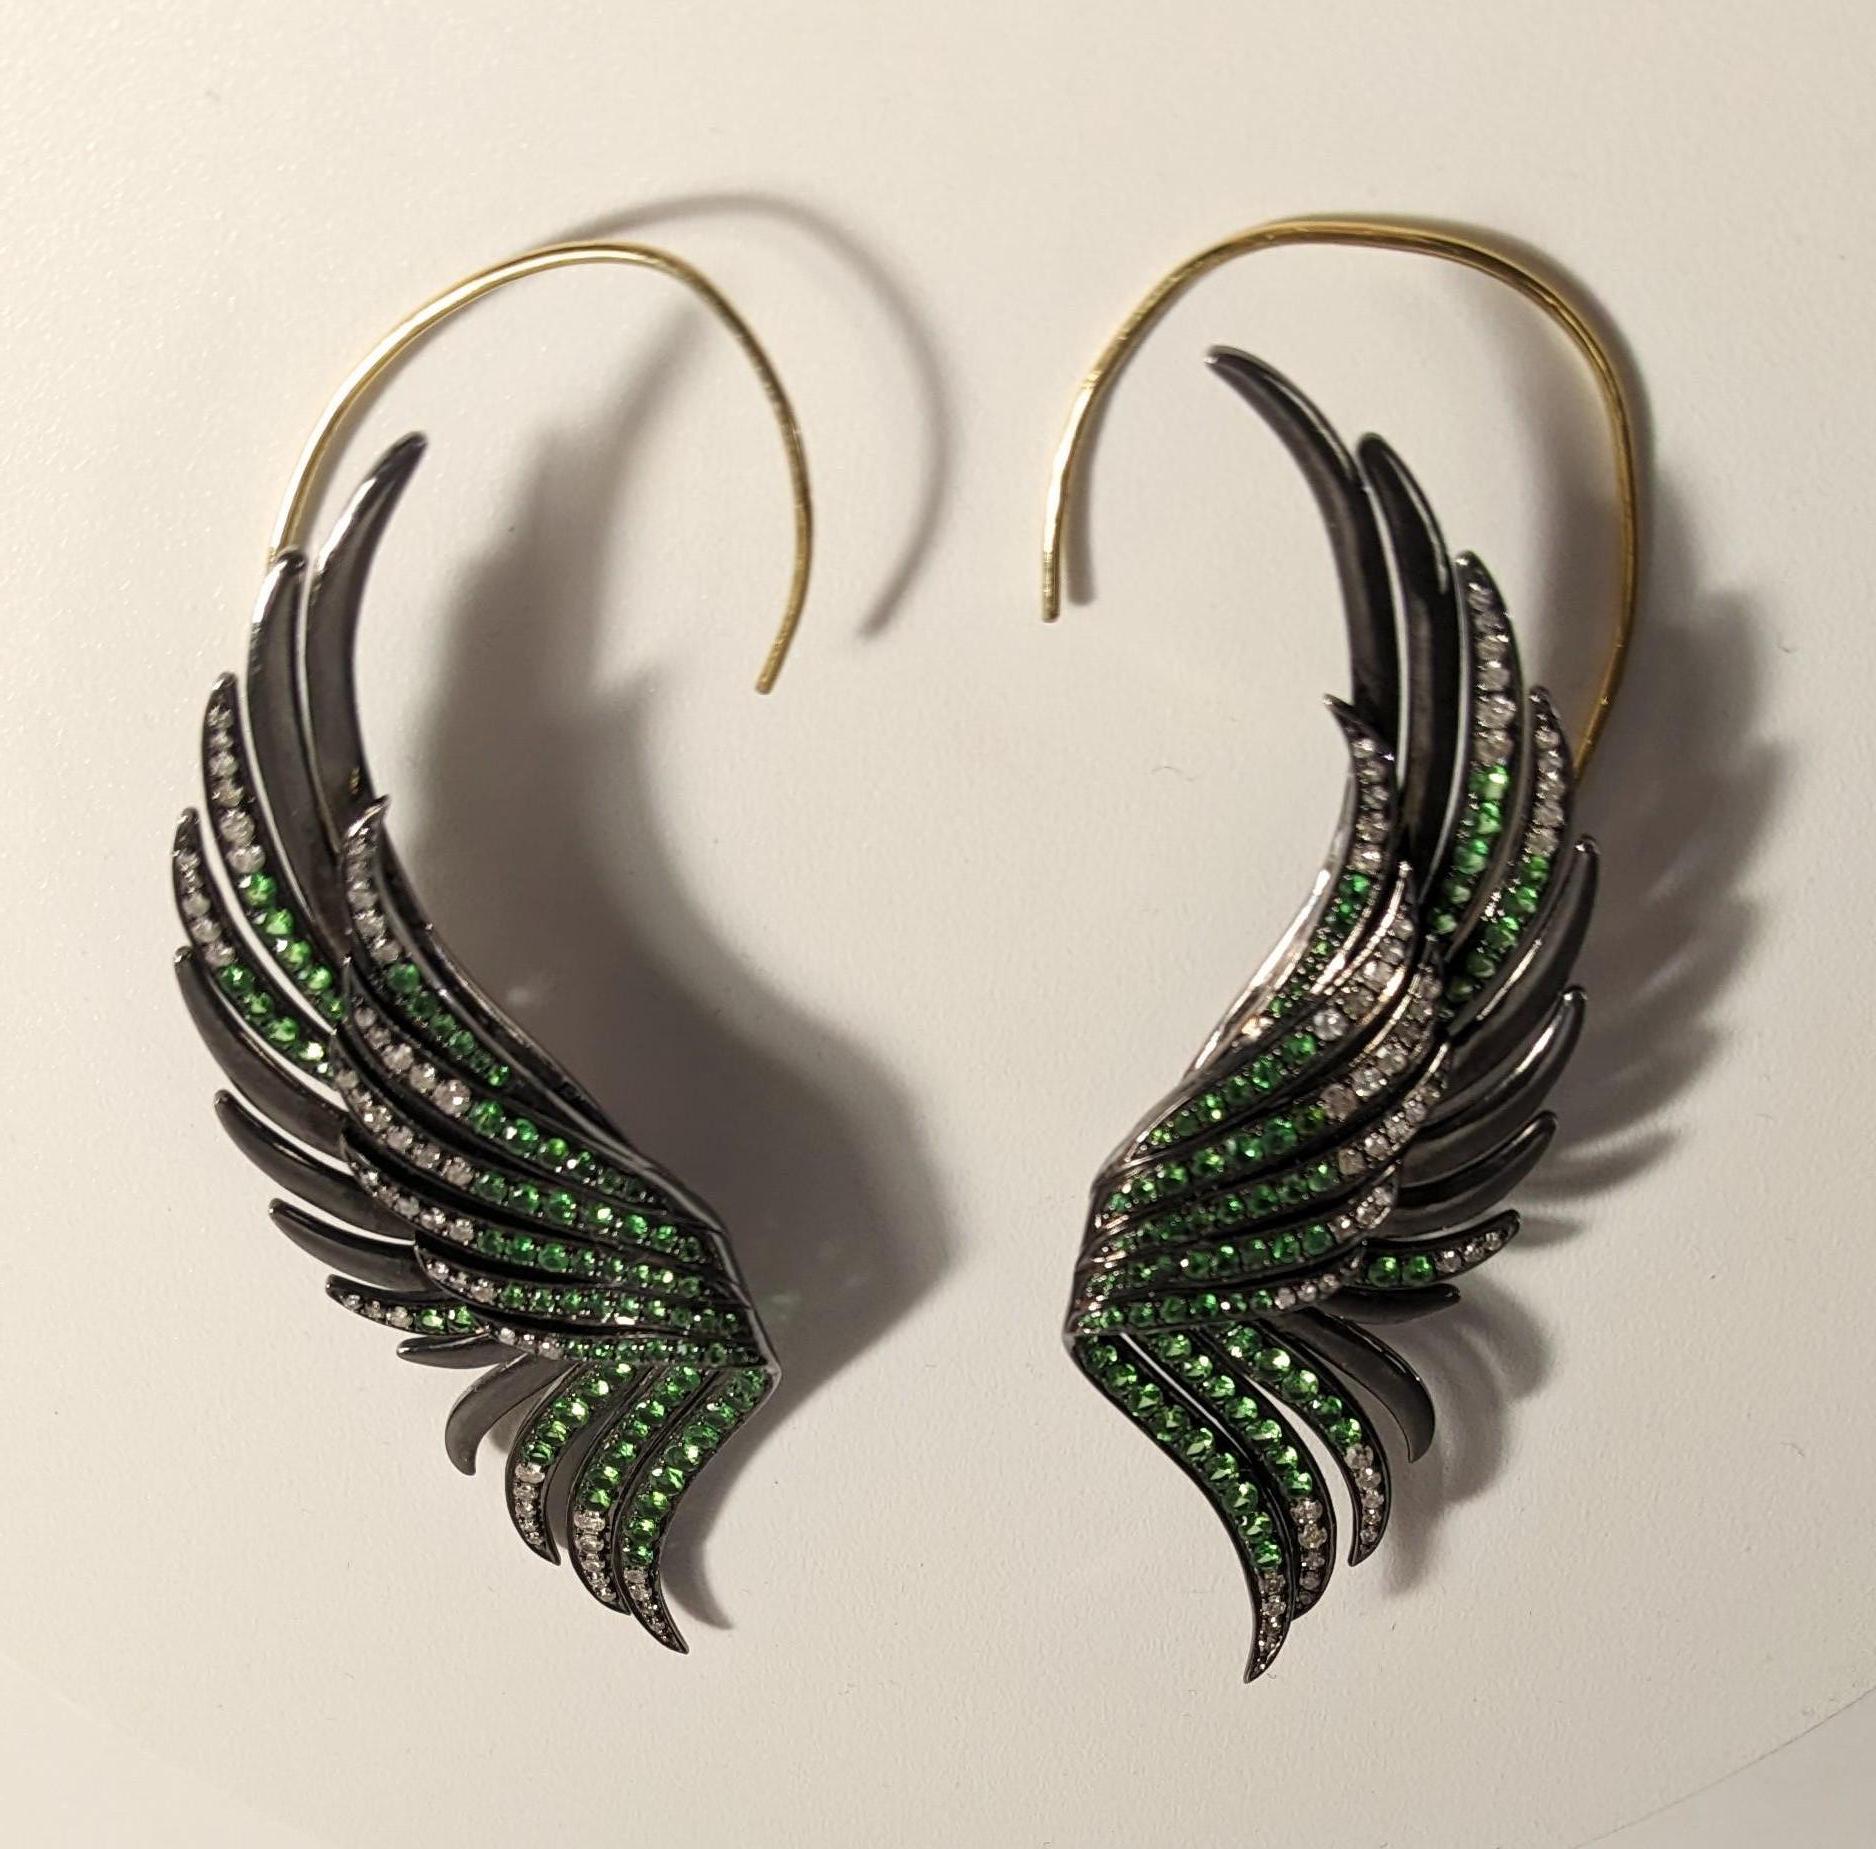 Feather Cuff Earrings in 18k  Gold, Silver, Diamonds and  Tsavorites
Earring in 18 carat gold weighing 2.20 g, silver 20.33 g, 110 diamonds 1.03 ct and 116 tsavosite 3.30 ct

◘ Weight 23,39 gr.
◘ Gold Weight 2,20 gr.
◘ Silver Weight 20,33 gr.
◘